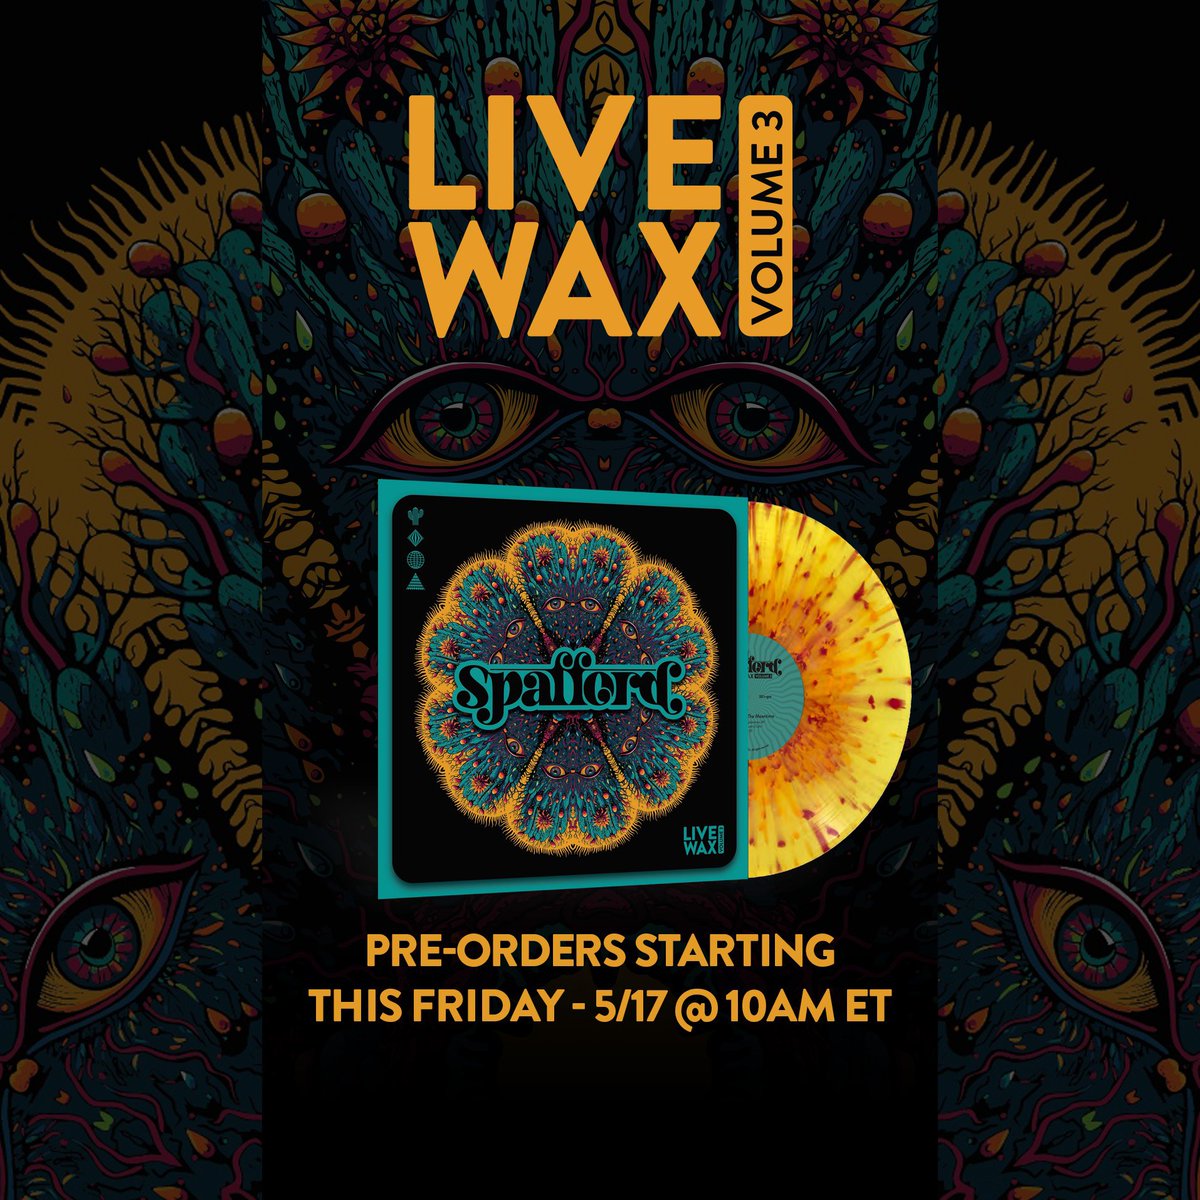 We're excited to unveil our THIRD LIVE vinyl release, Live Wax, Vol. 3! 🎶🎪

pre-order starts 5/17 at 10am ET spaffordprints.bigcartel.com/category/vinyl
limited number of vinyl + poster bundles available